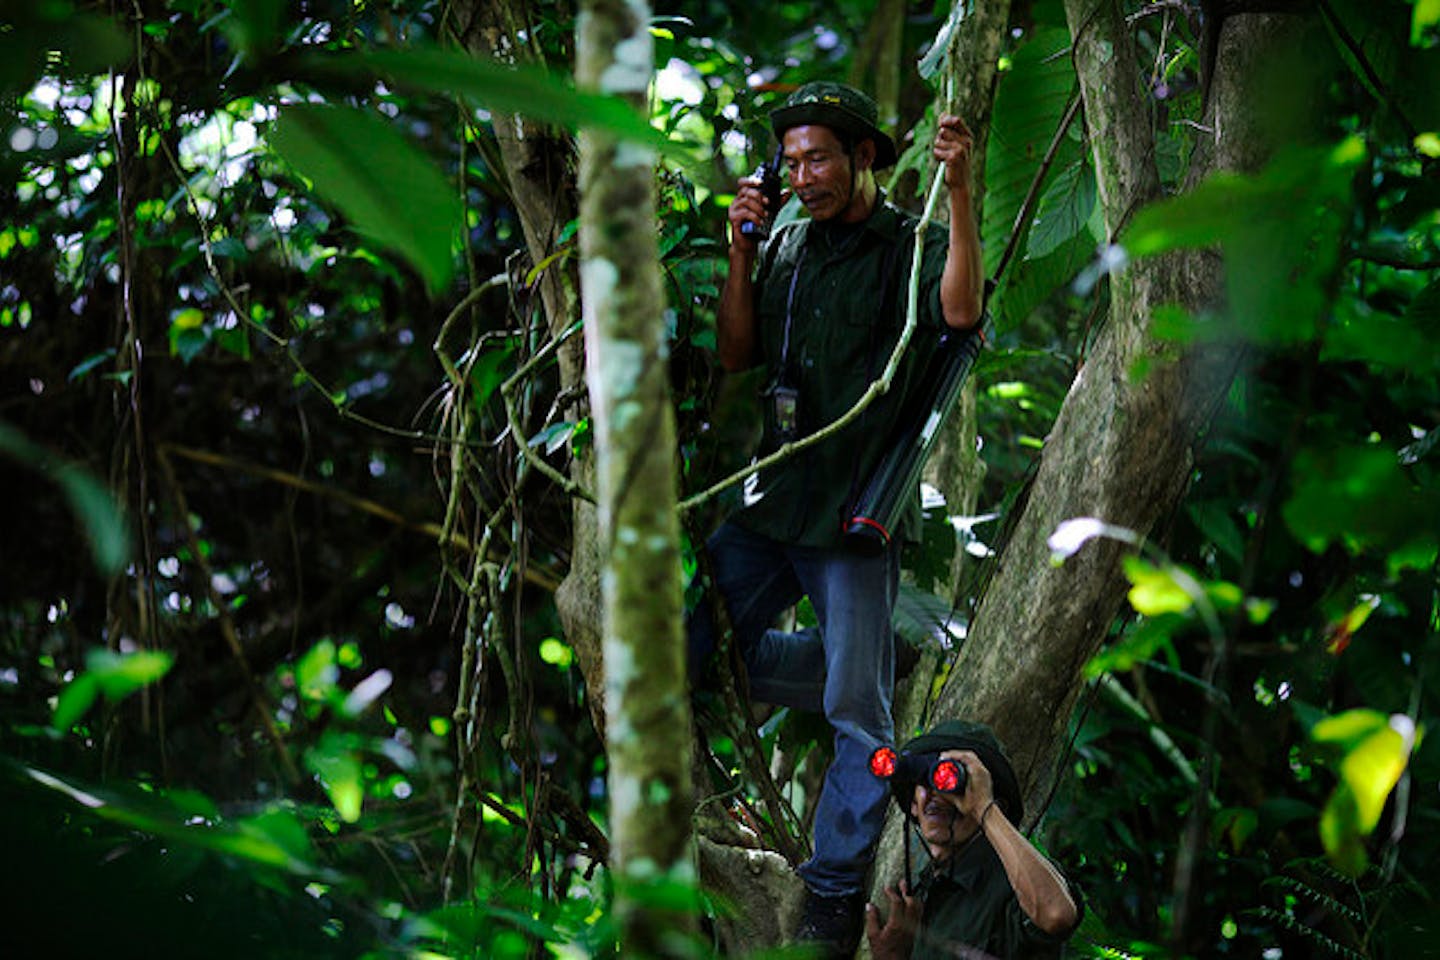 rangers patrol forests in Aceh Indonesia